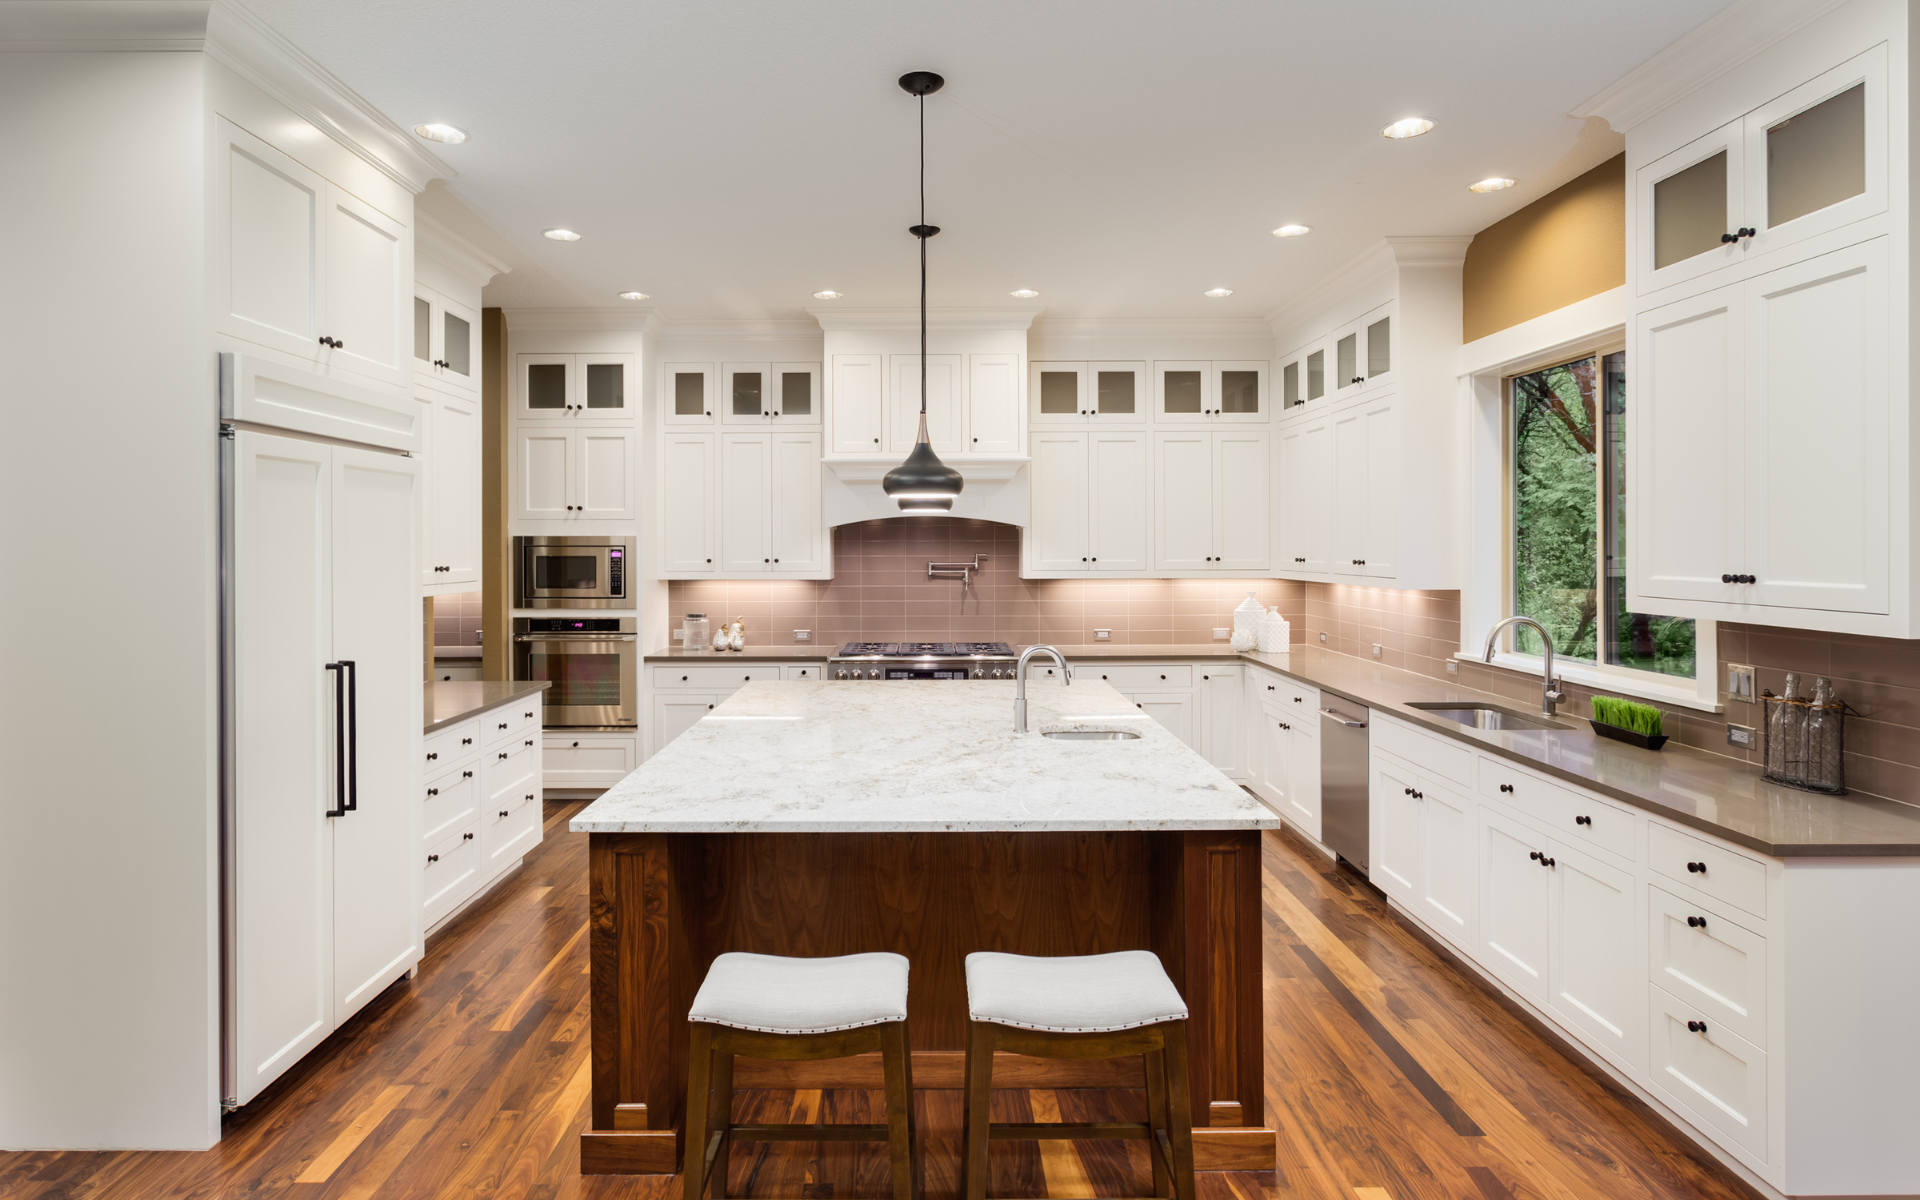 Spacious U shape kitchen with white inset cabinets